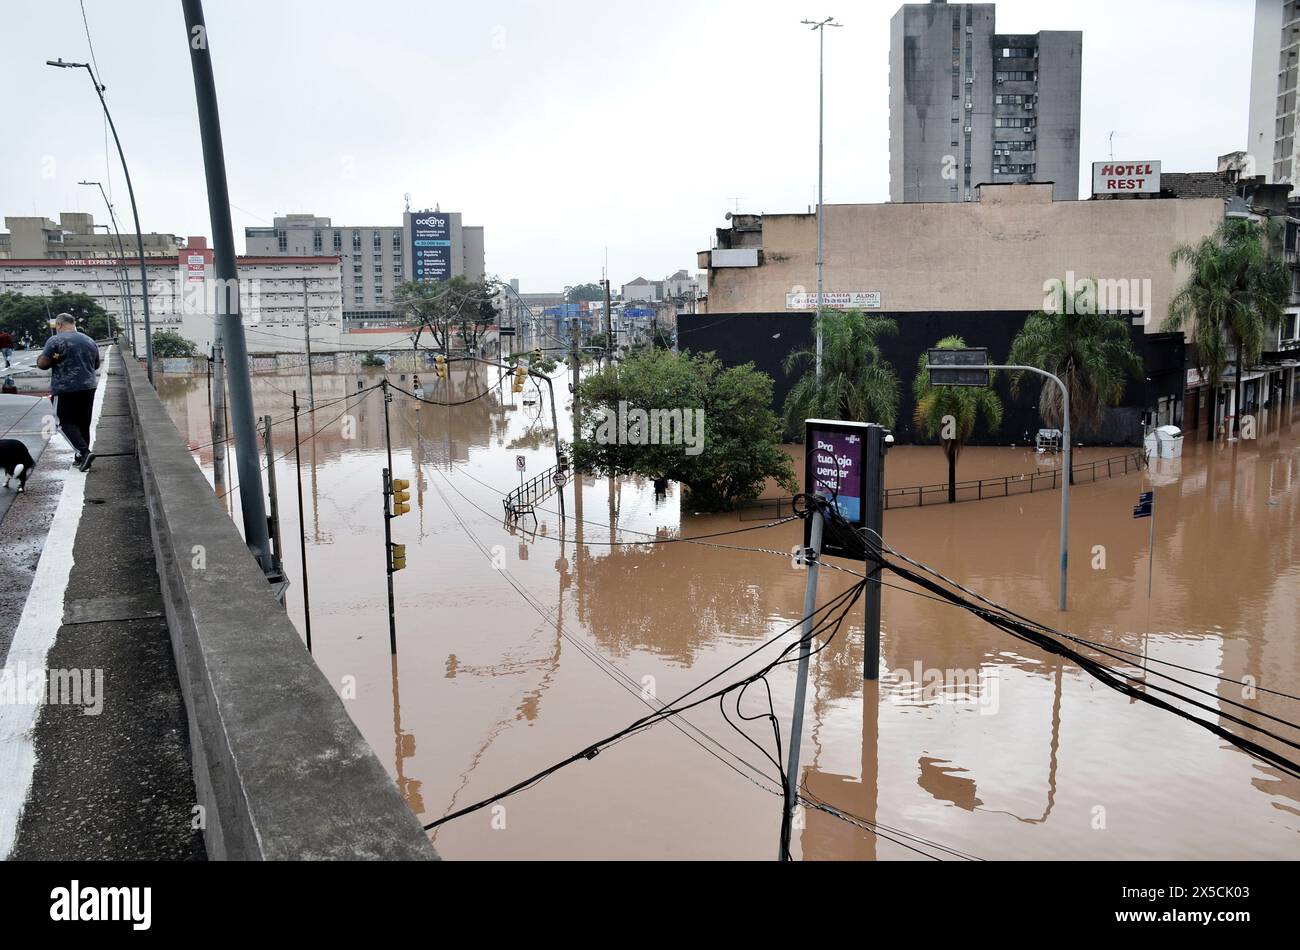 May 8, 2024, Porto Alegre, Rio Grande Do Sul, Brasil: Porto Alegre (RS), 05/08/2024 Ã¢â‚¬' RAIN/WEATHER/FLOOD/RS Ã¢â‚¬' Record of damage caused by flooding in the Historic Center and South Zone region of the city of Porto Alegre, this Wednesday (8). There is an intense effort by volunteers, public security bodies and the Armed Forces to help the population of Rio Grande do Sul that finds itself in a situation of public calamity, following the heavy rains that have hit the state of Rio Grande do Sul since last week. (Foto: Marcelo Oliveira/Thenews2/Zumapress) (Credit Image: © Marcelo Olivei Stock Photo